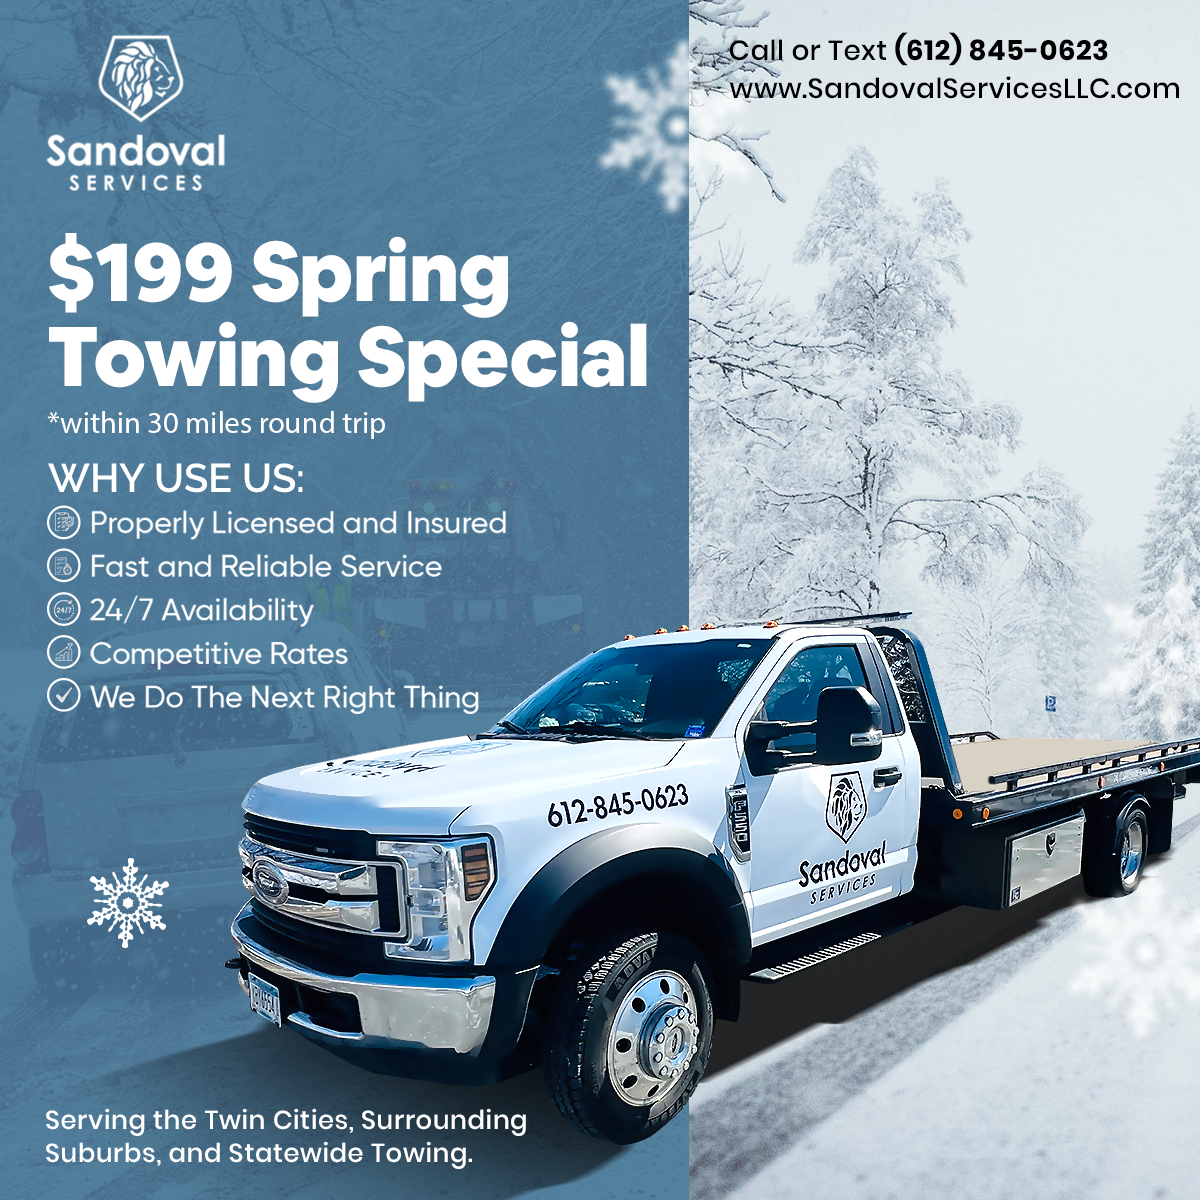 Sandoval Services Towing - Brooklyn Center, MN - (612)845-0623 | ShowMeLocal.com